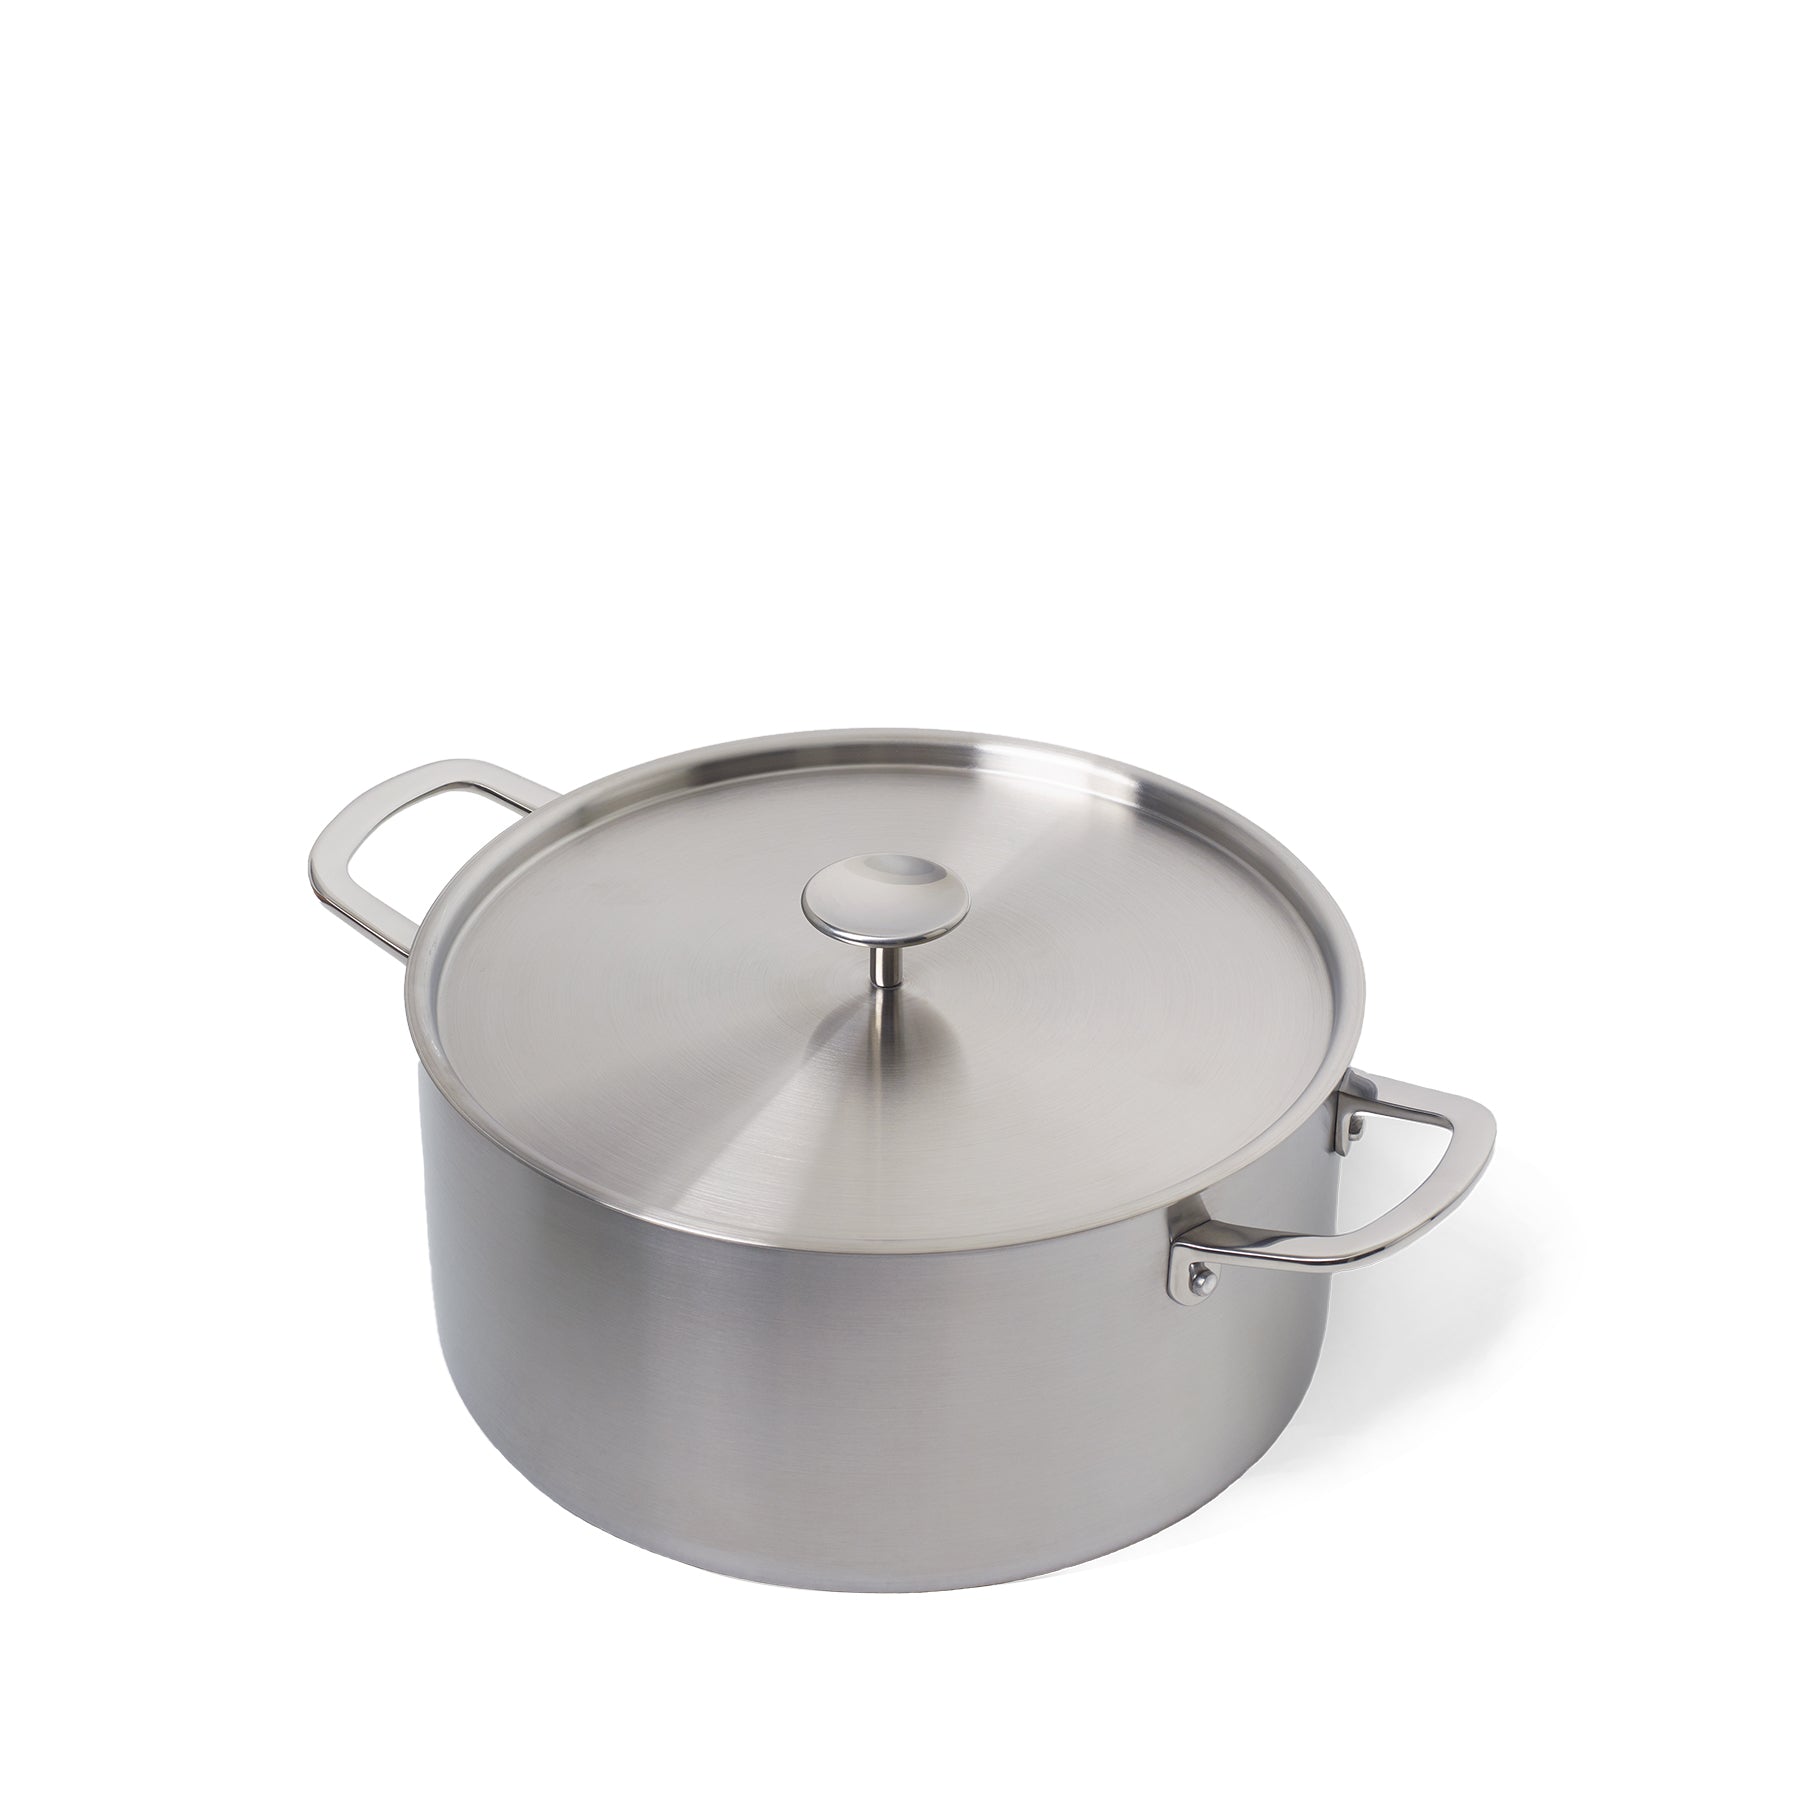 Stainless Steel Tri Ply Stockpot Zoom Image 1